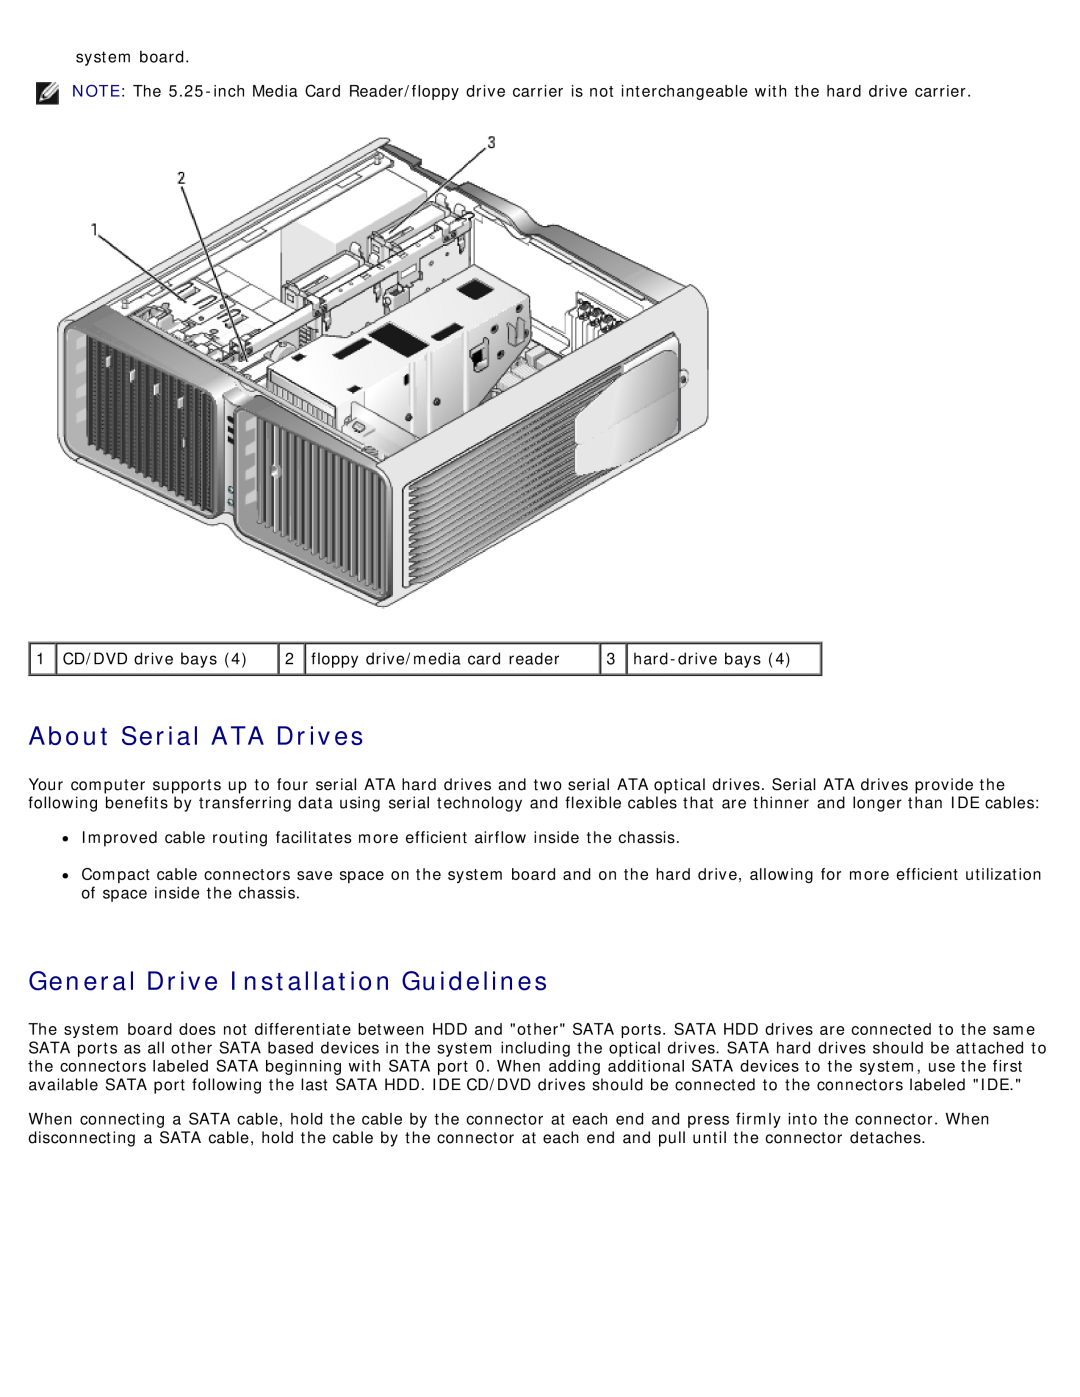 Dell DCDO, 710 H2C About Serial ATA Drives, General Drive Installation Guidelines, system board, 1 CD/DVD drive bays 